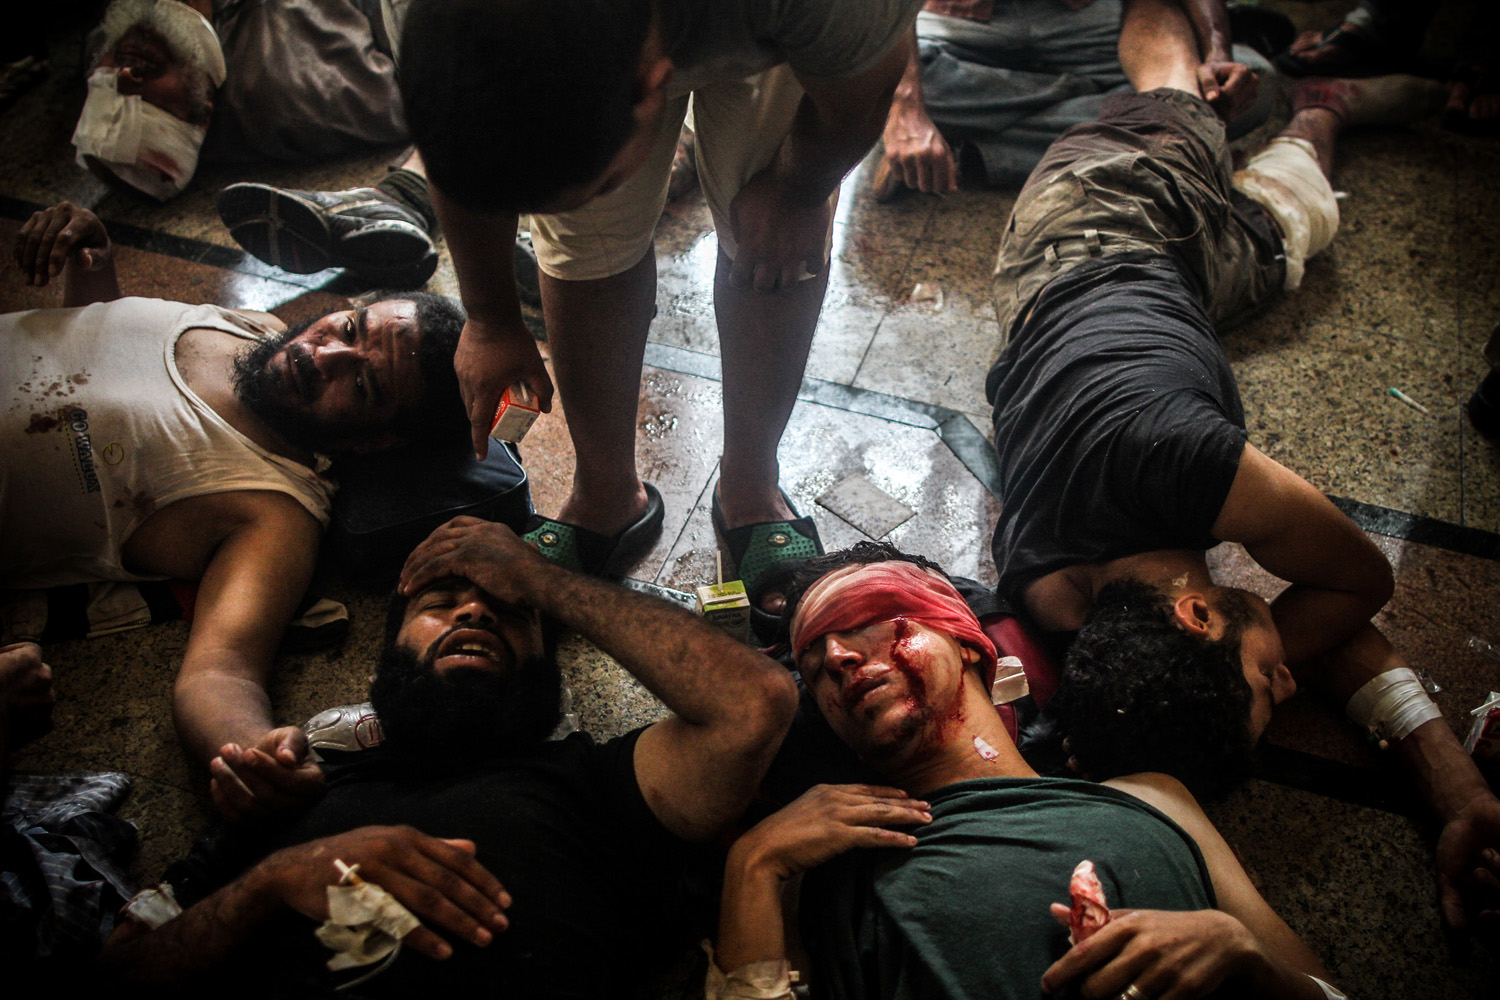 A volunteer medic helps injured supporters of ousted president Mohamed Morsi who laid on the ground at a makeshift hospital during the violent dispersal of the camp by security forces. August 14, 2013.